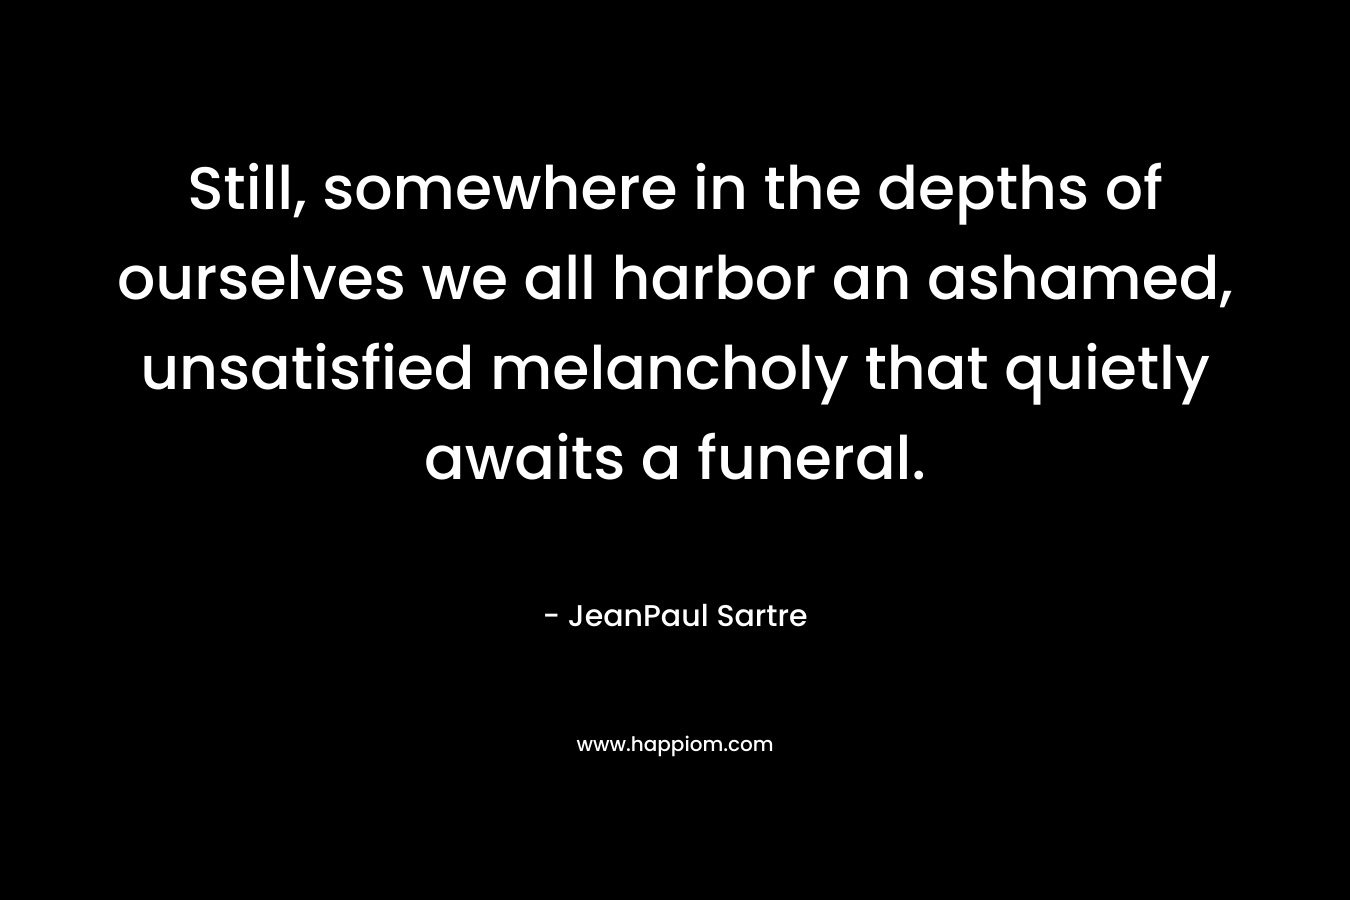 Still, somewhere in the depths of ourselves we all harbor an ashamed, unsatisfied melancholy that quietly awaits a funeral.